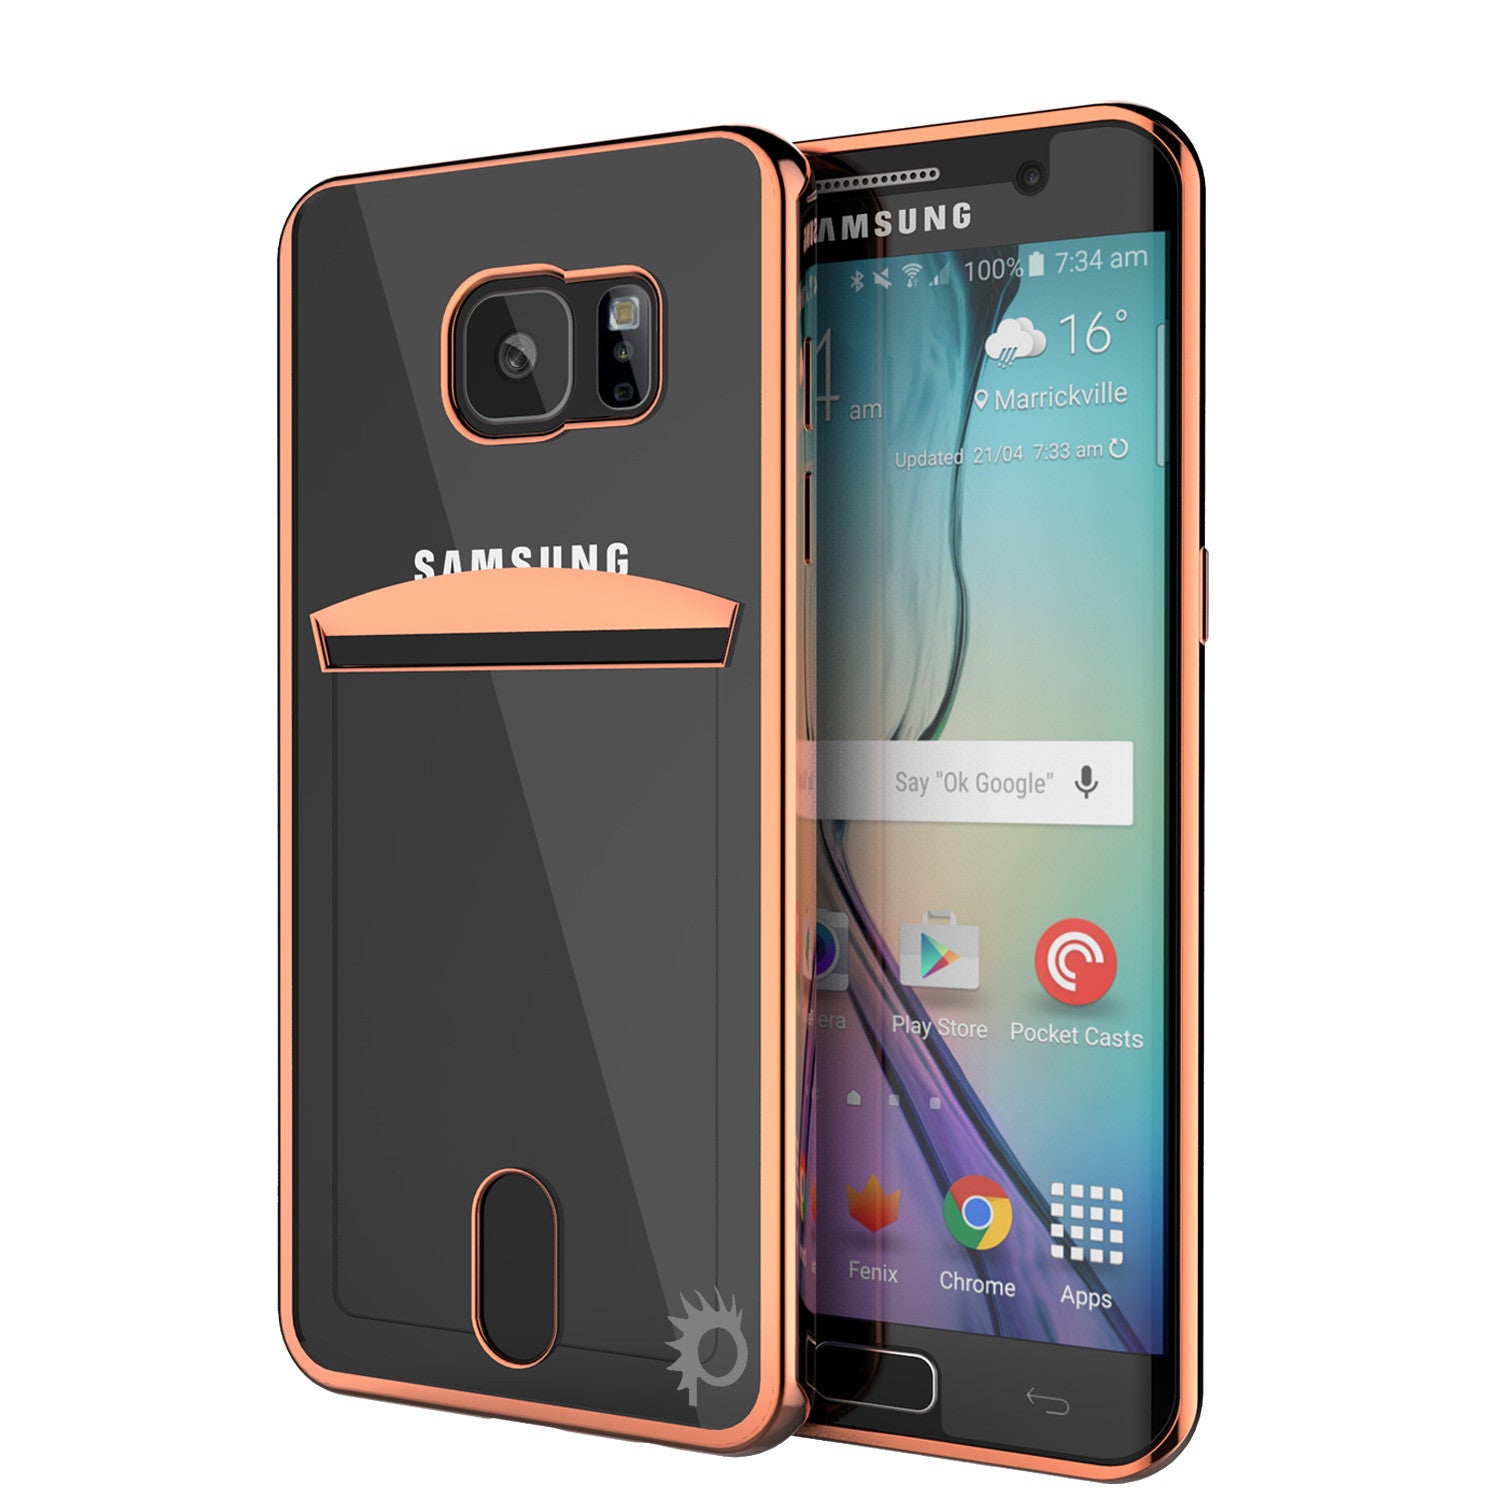 Galaxy S6 EDGE Case, PUNKCASE® LUCID Rose Gold Series | Card Slot | SHIELD Screen Protector (Color in image: Rose Gold)